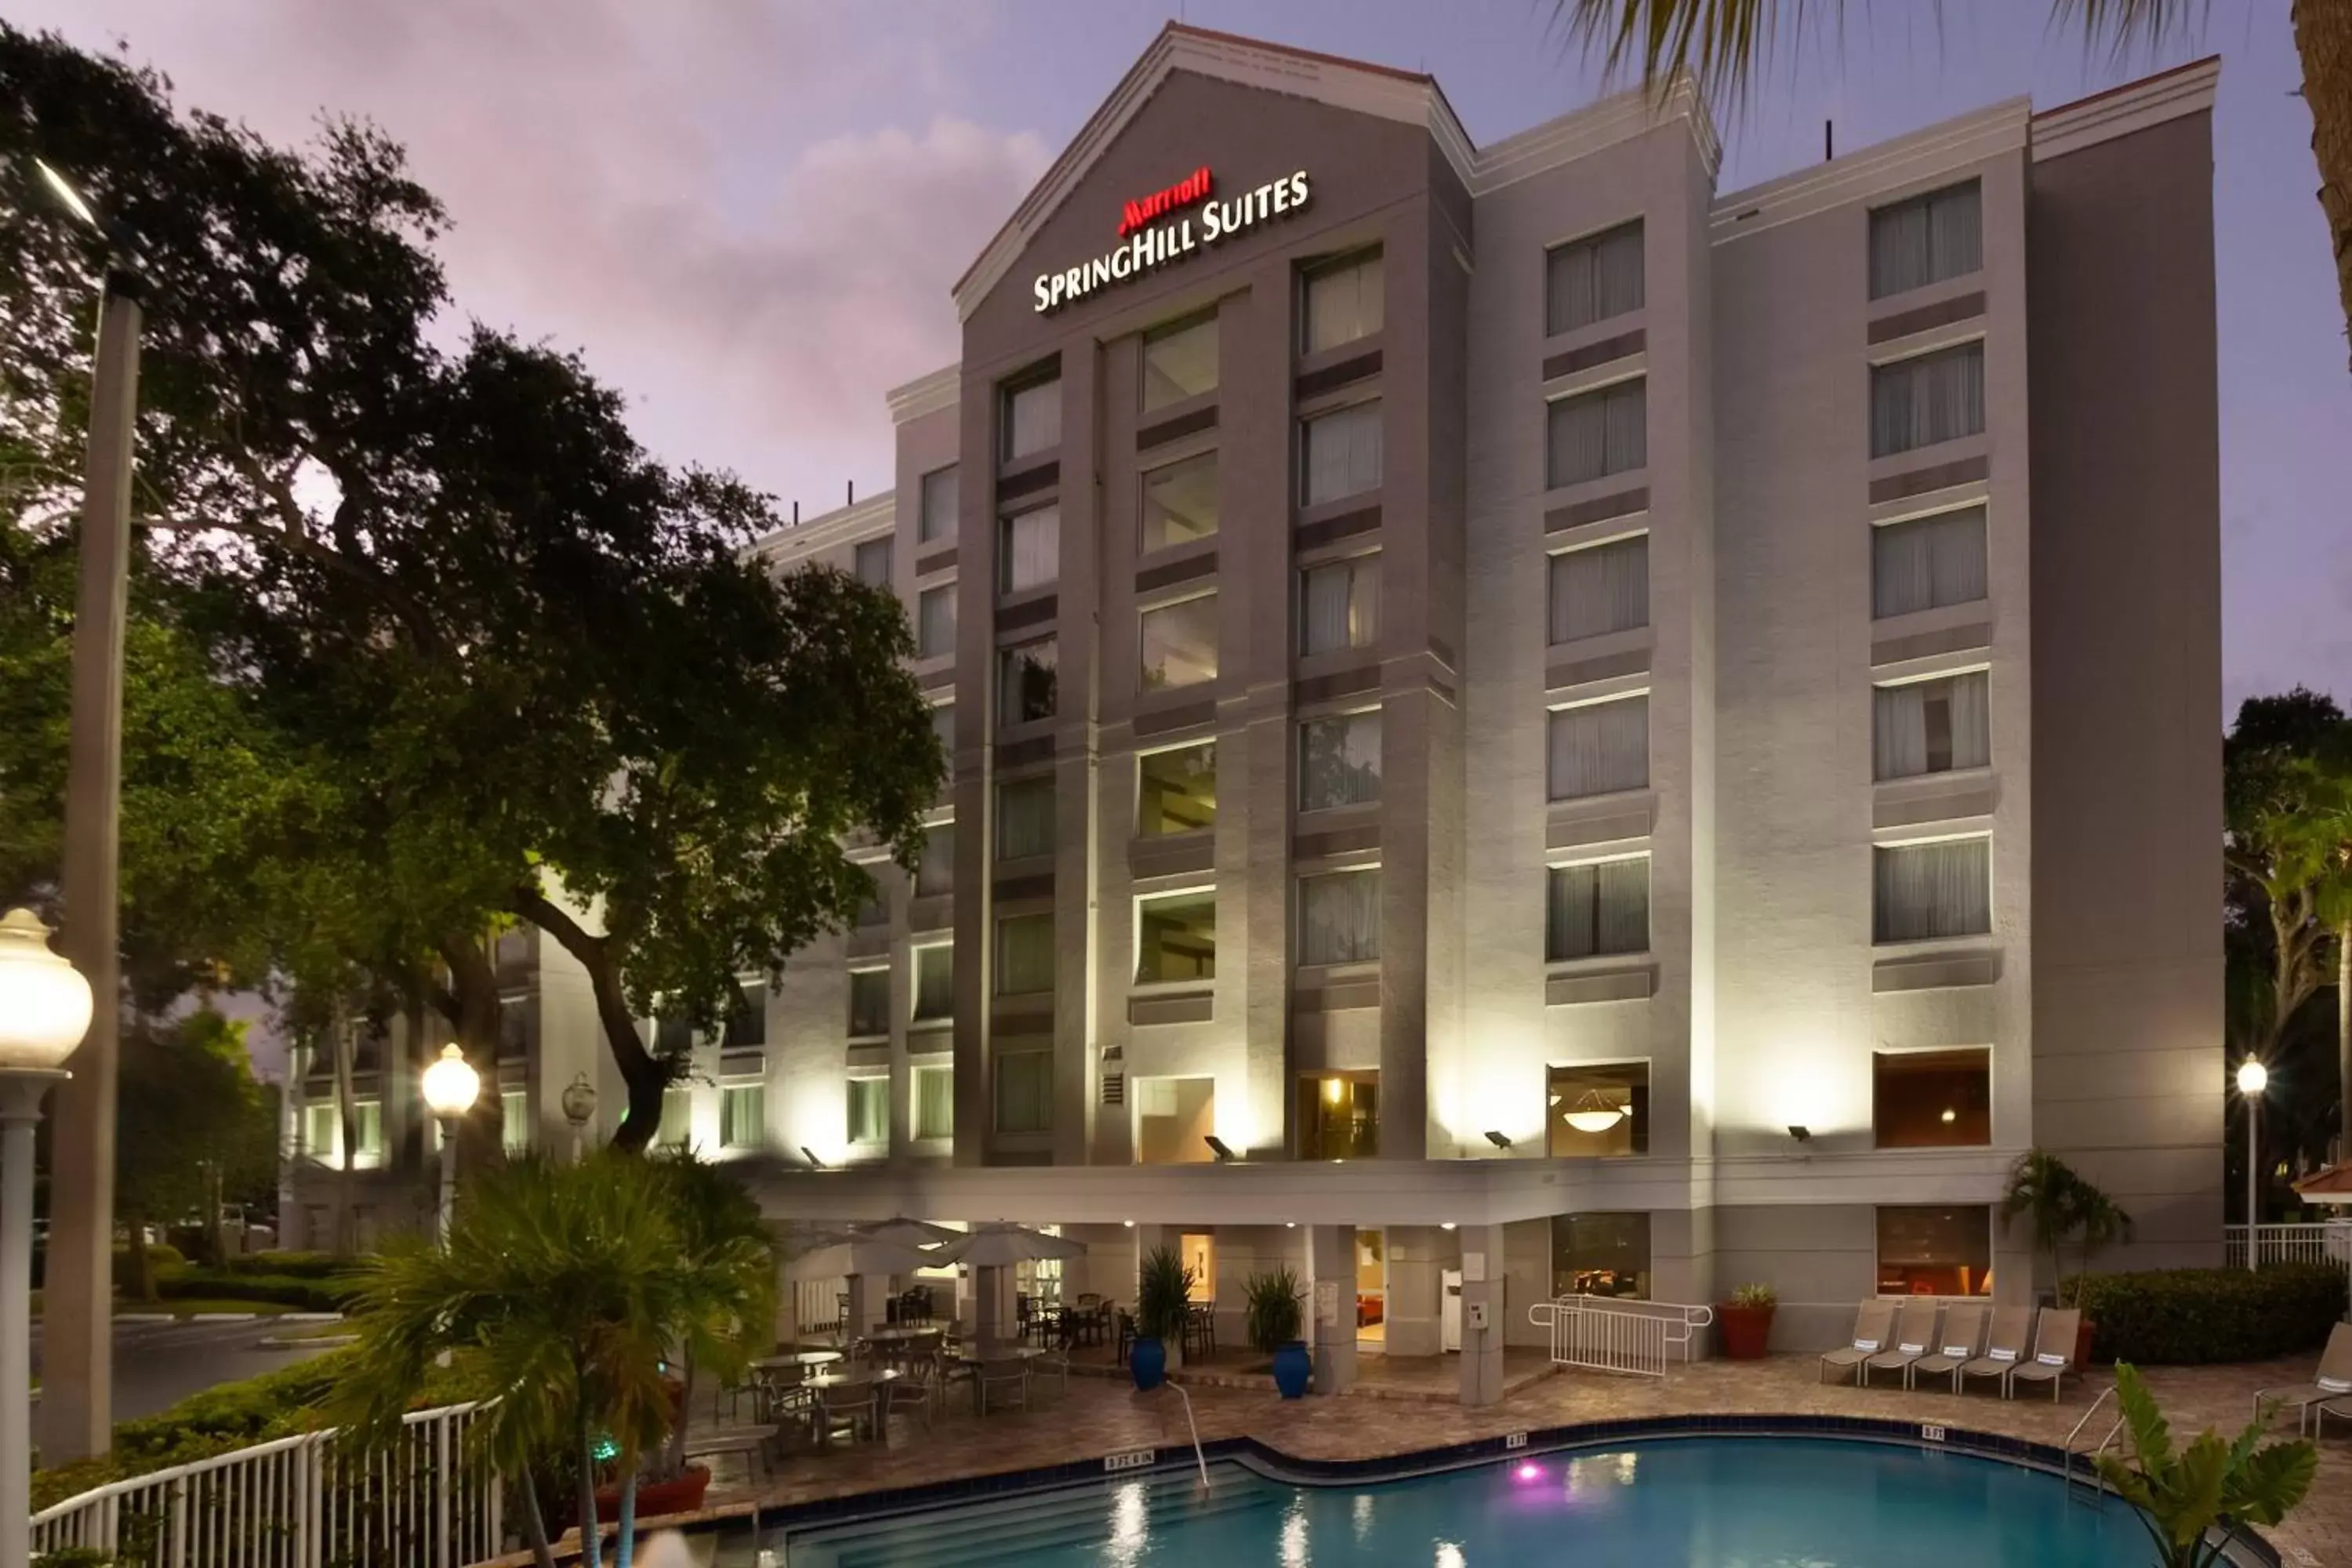 Property Building in SpringHill Suites Fort Lauderdale Airport